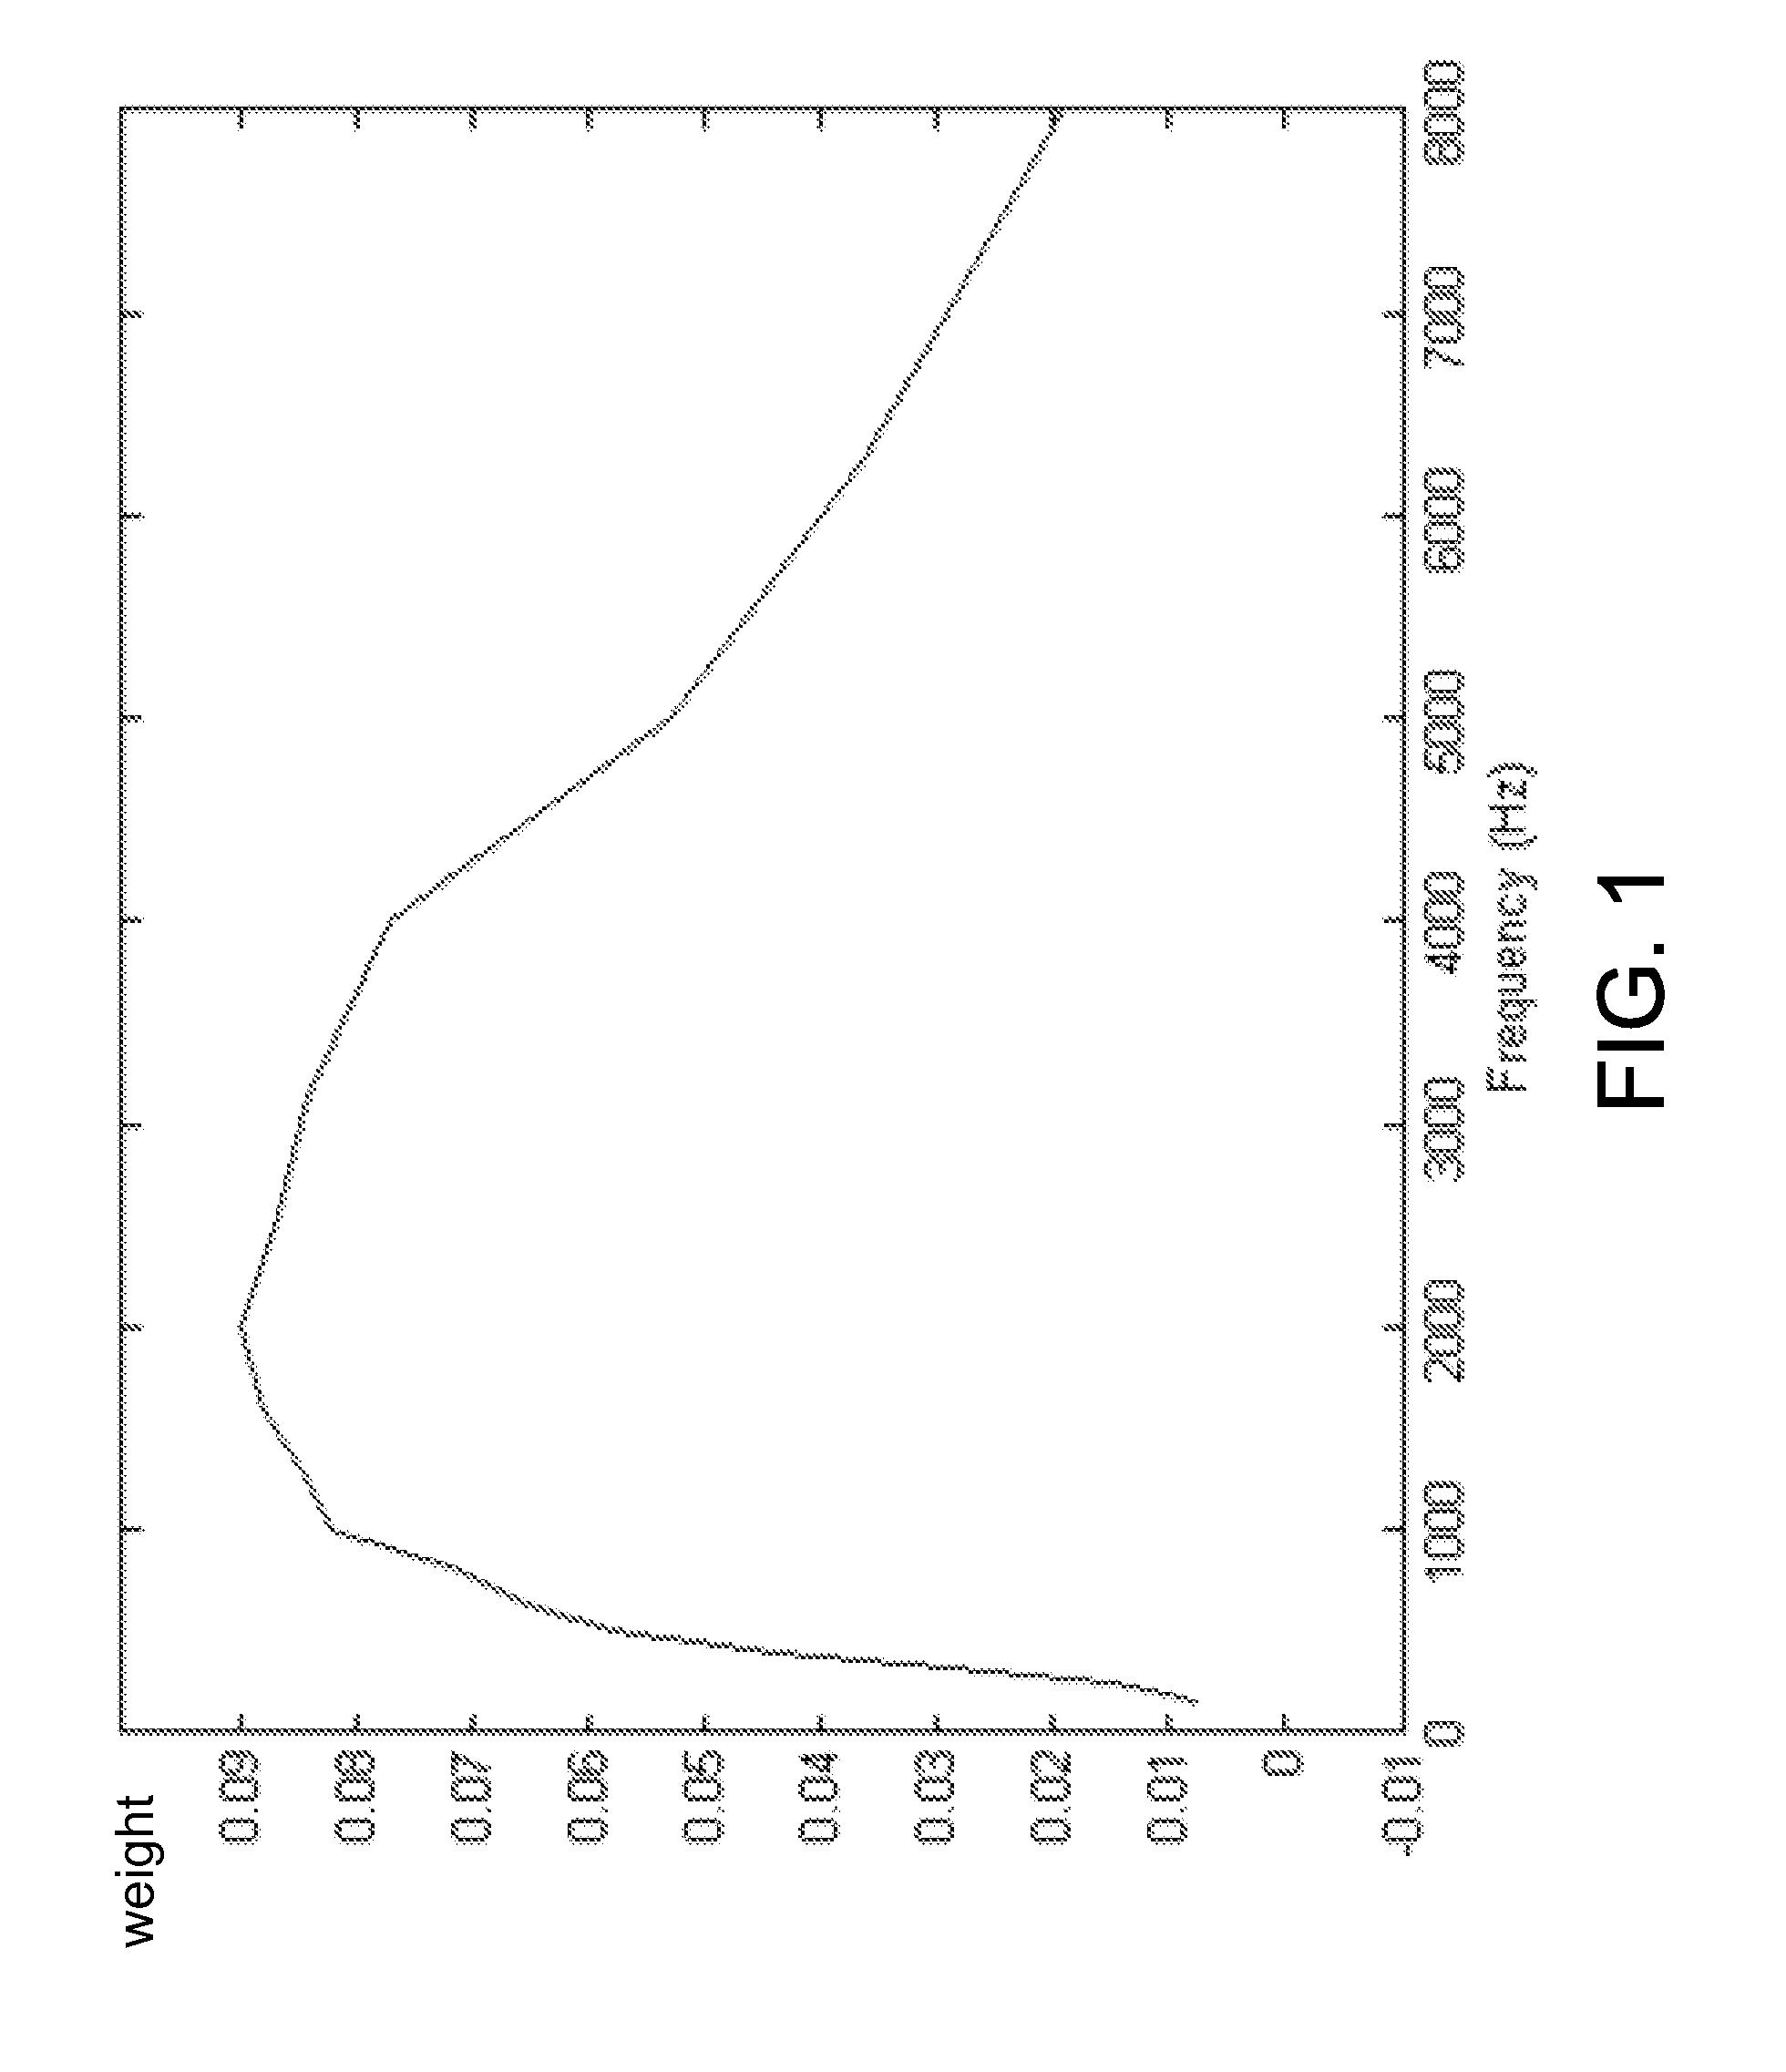 Systems, methods, apparatus, and computer program products for spectral contrast enhancement